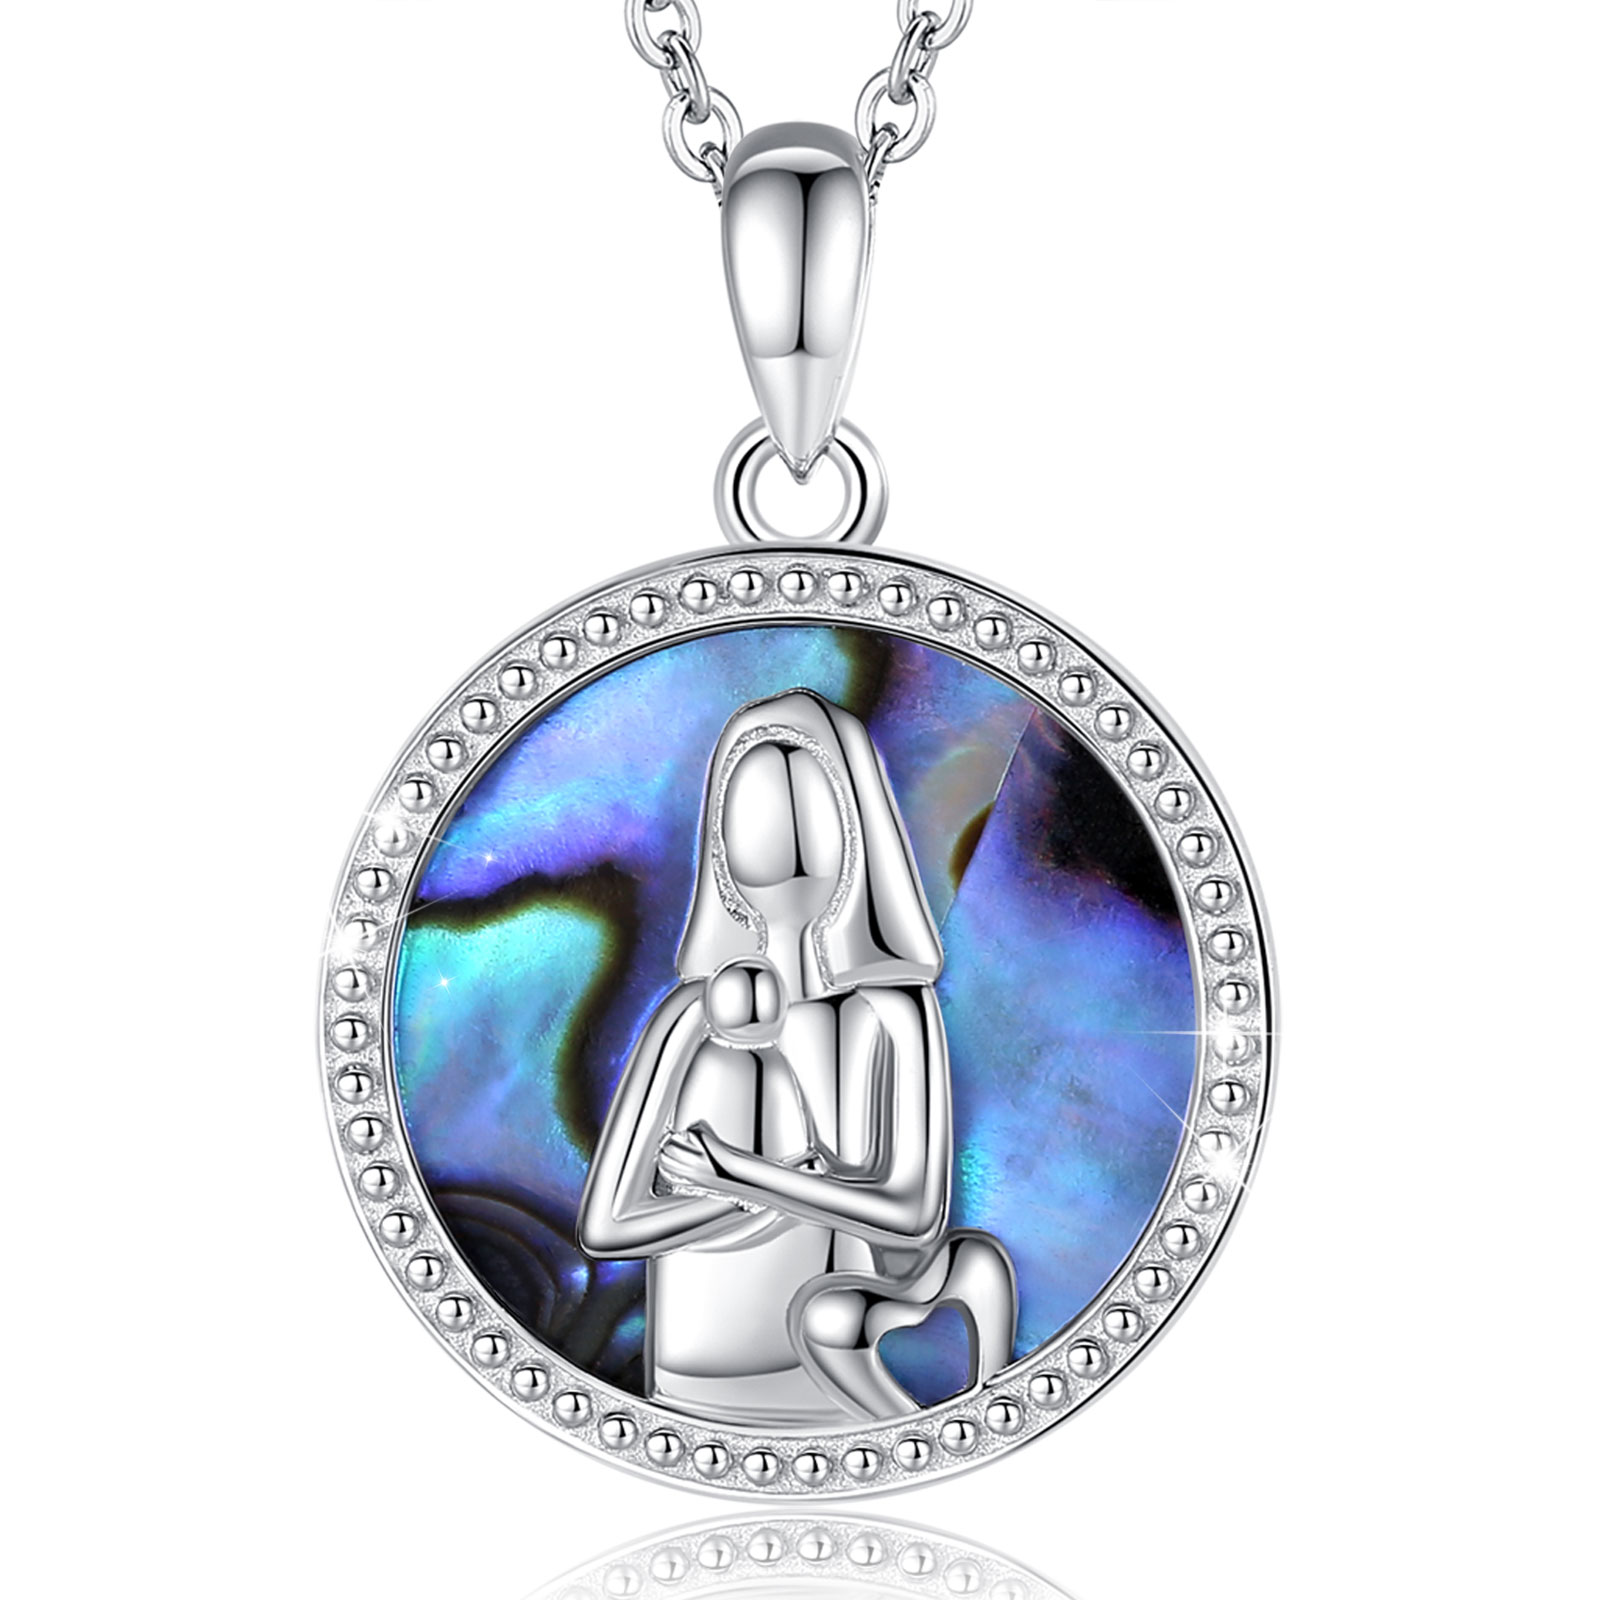 Merryshine Jewelry Colorful Abalone Shell 925 Sterling Silver Circle Charm Pendant Necklace